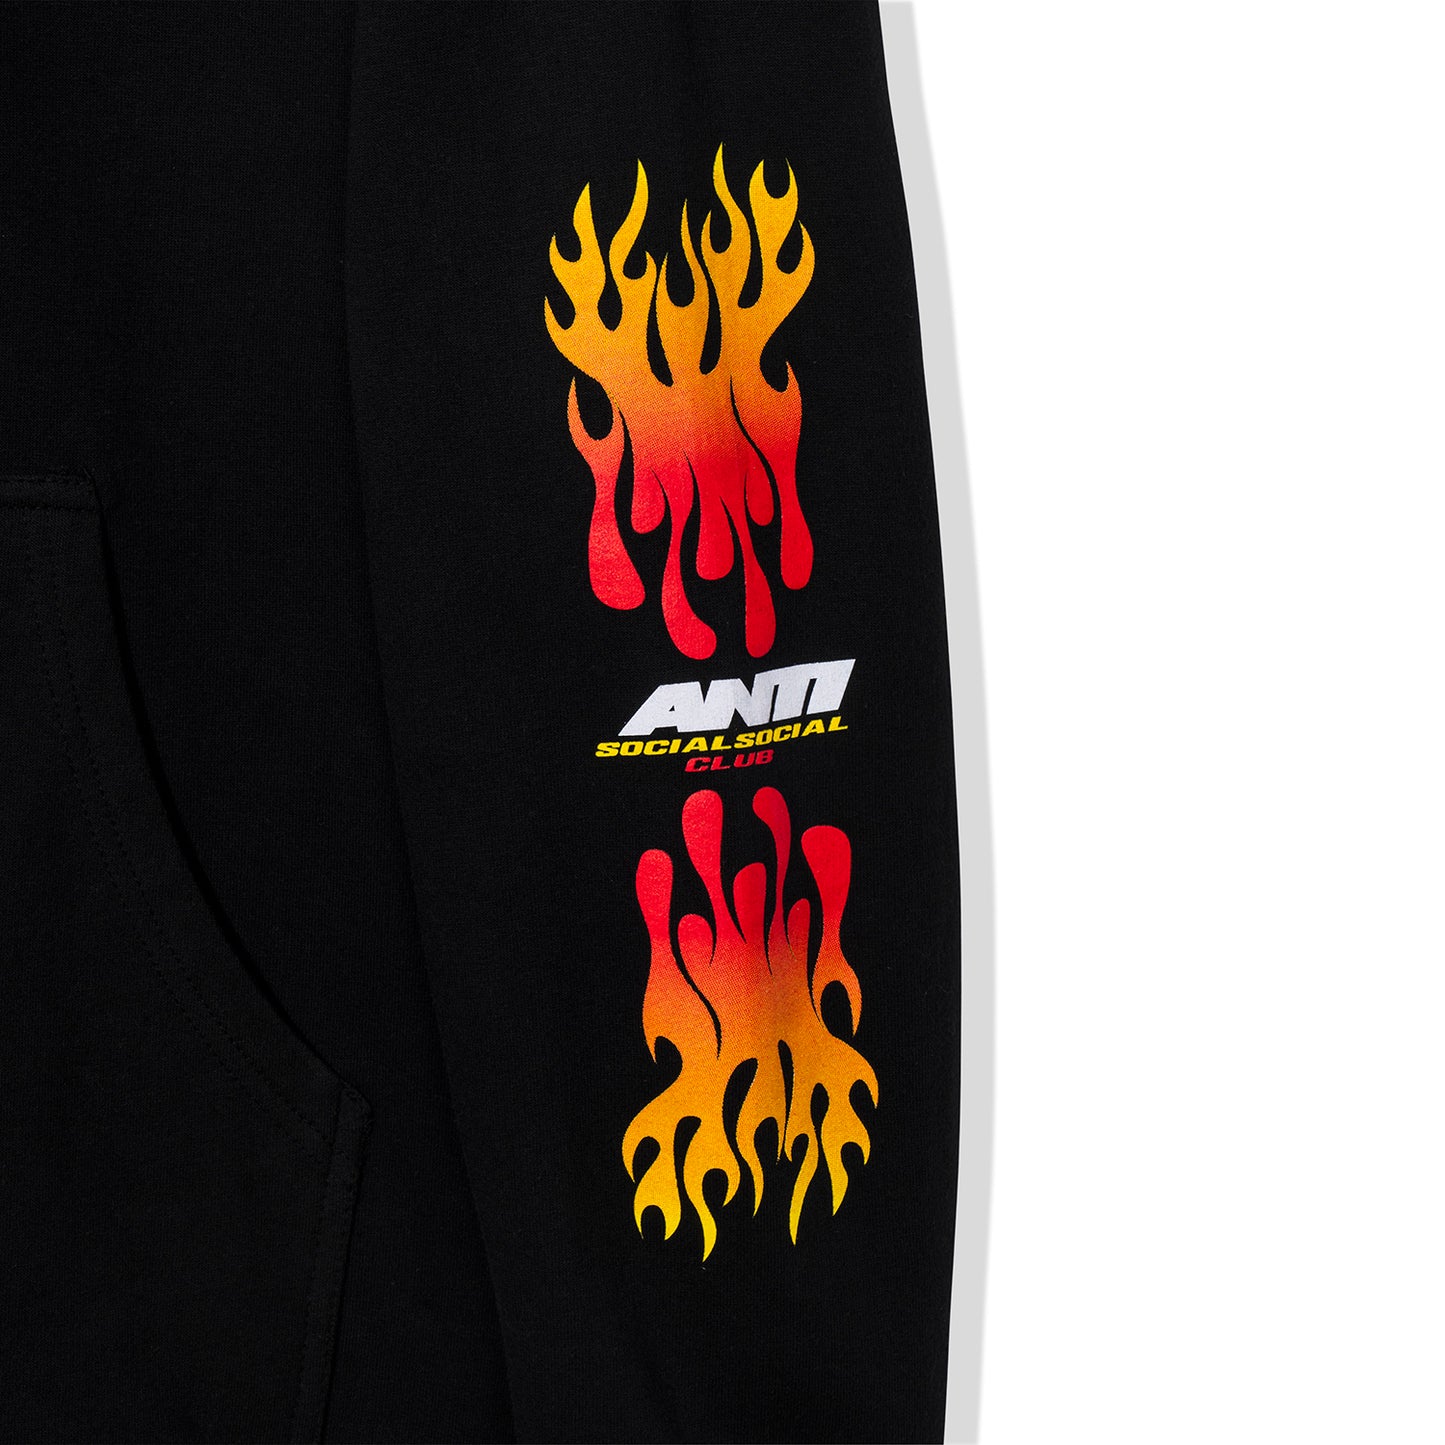 Hot At First Hoodie